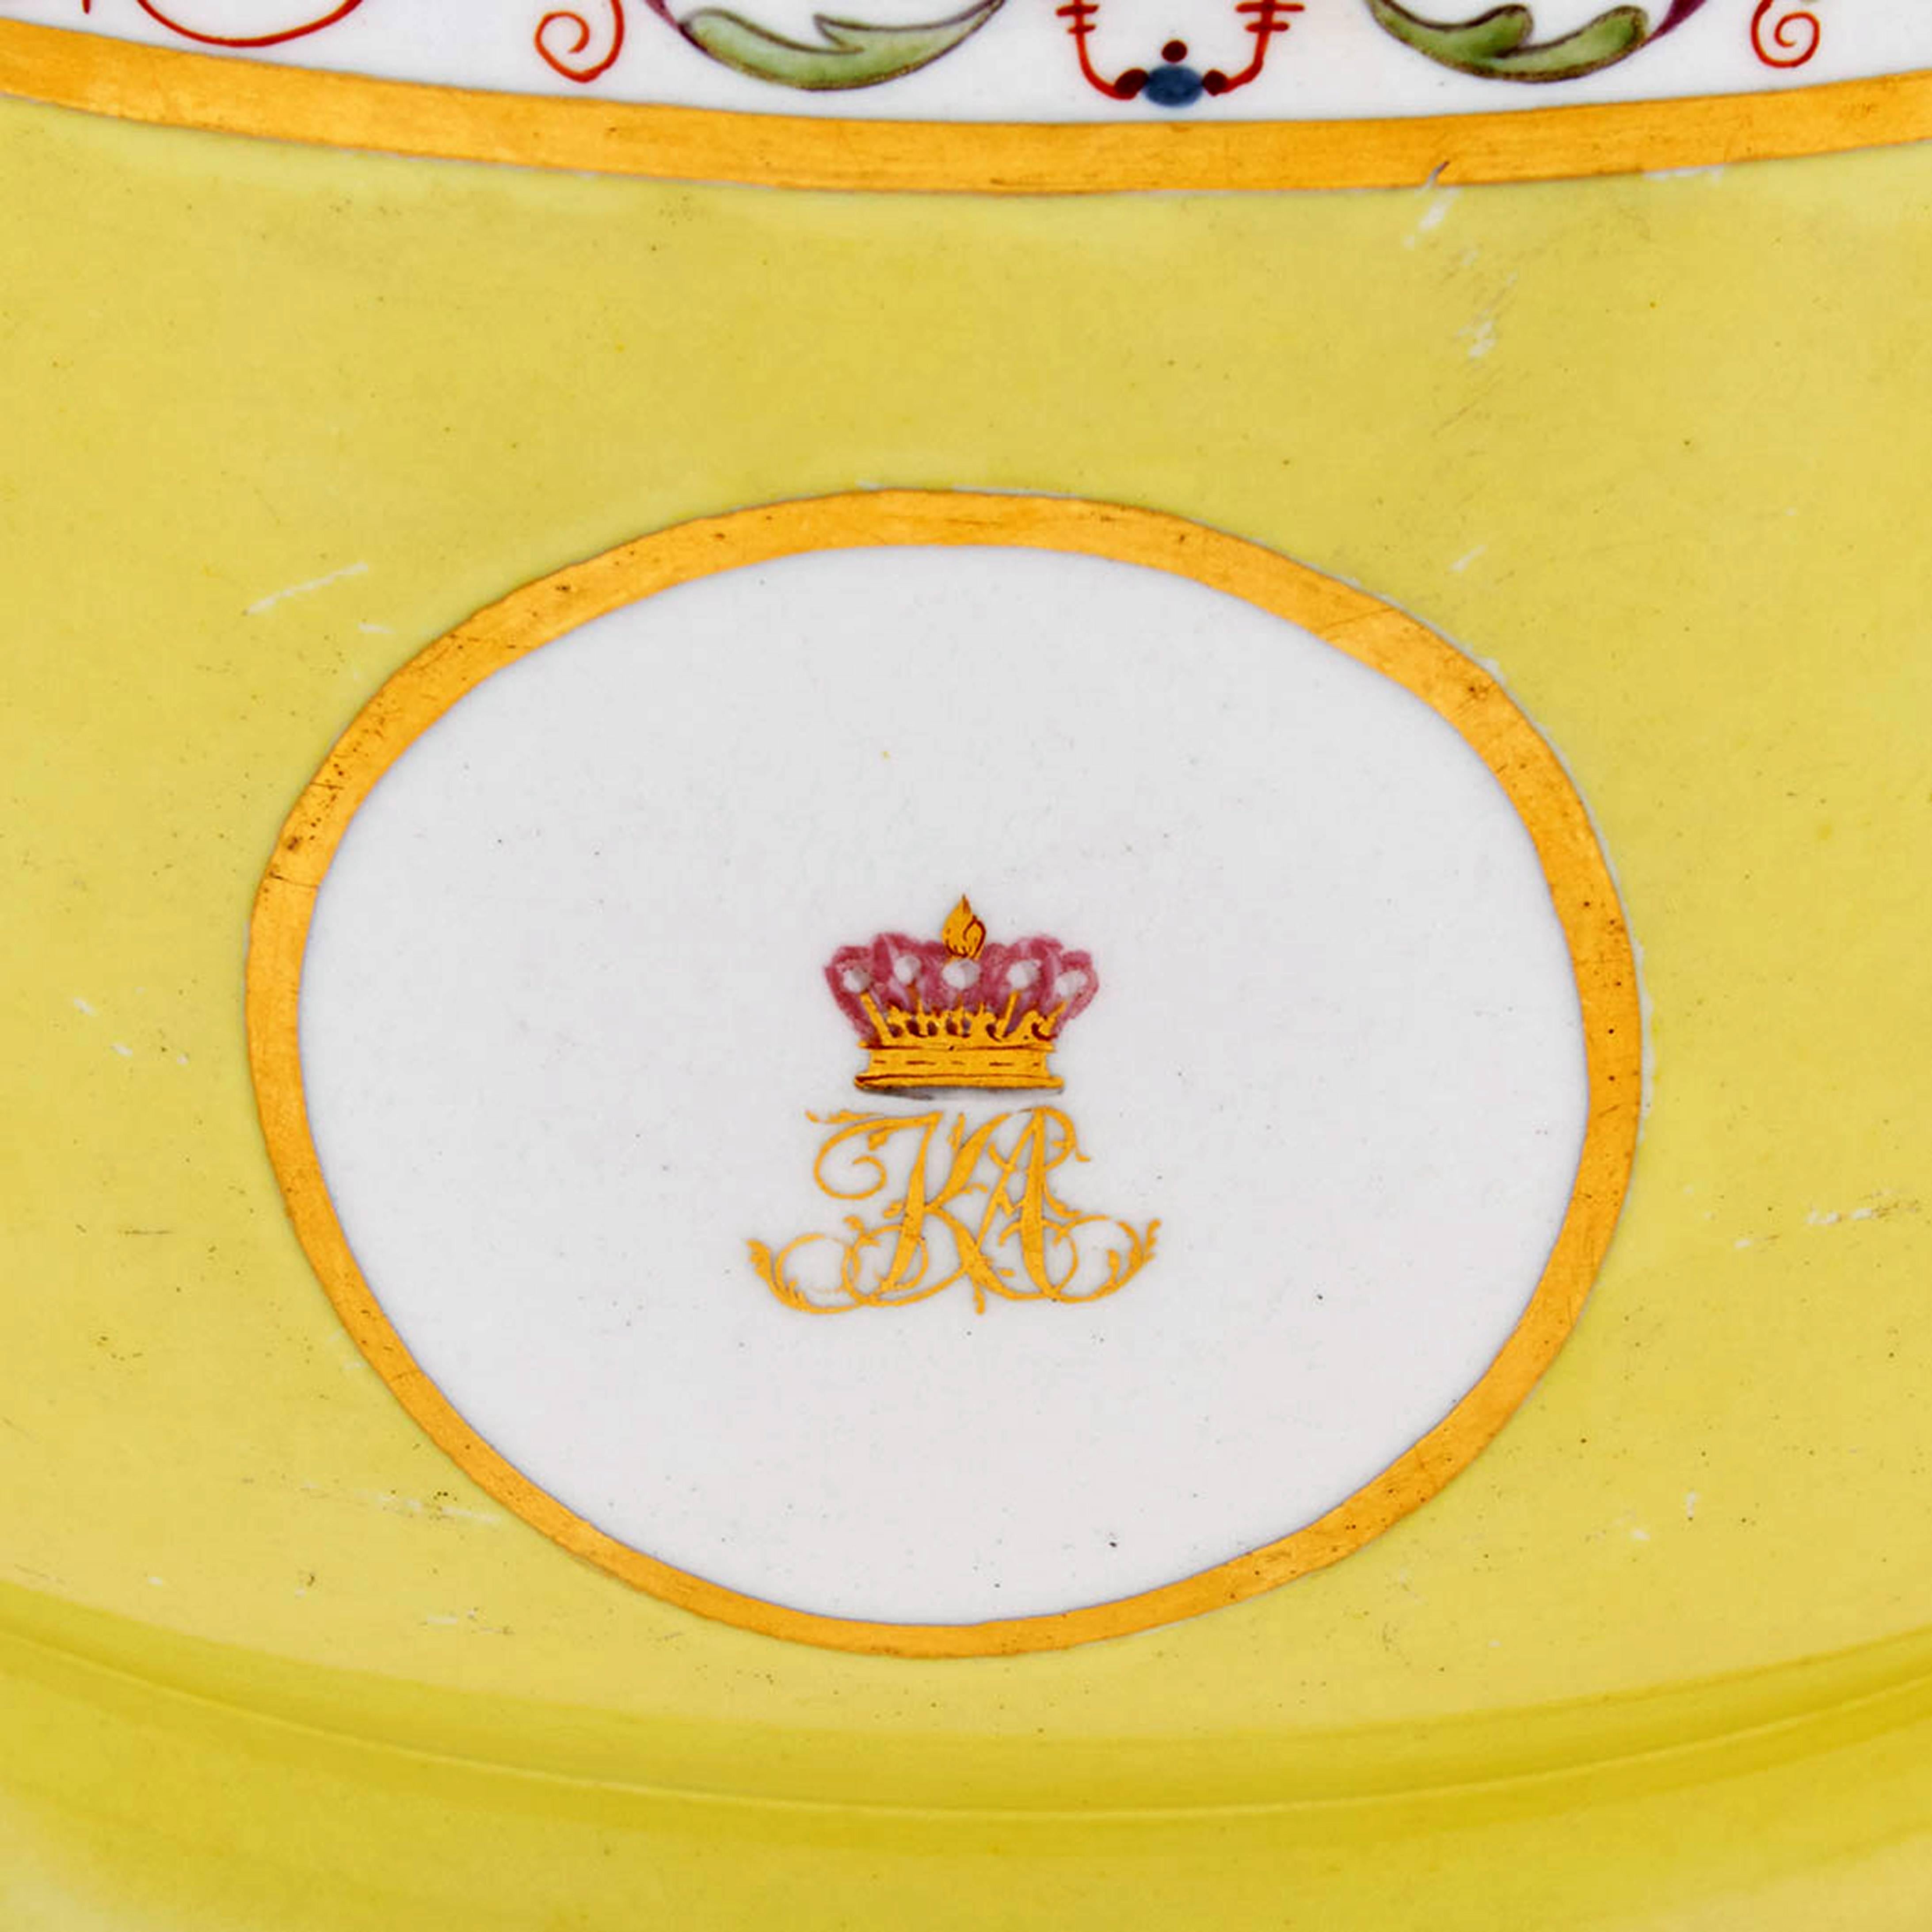 Coalport porcelain yellow-ground wine coolers, 
circa 1800-1810.

Each circular yellow-ground porcelain wine cooler has a polychrome scrolling foliate and urn band above a crest of an Earl with a crown above a monogram of interlaced KA.

The